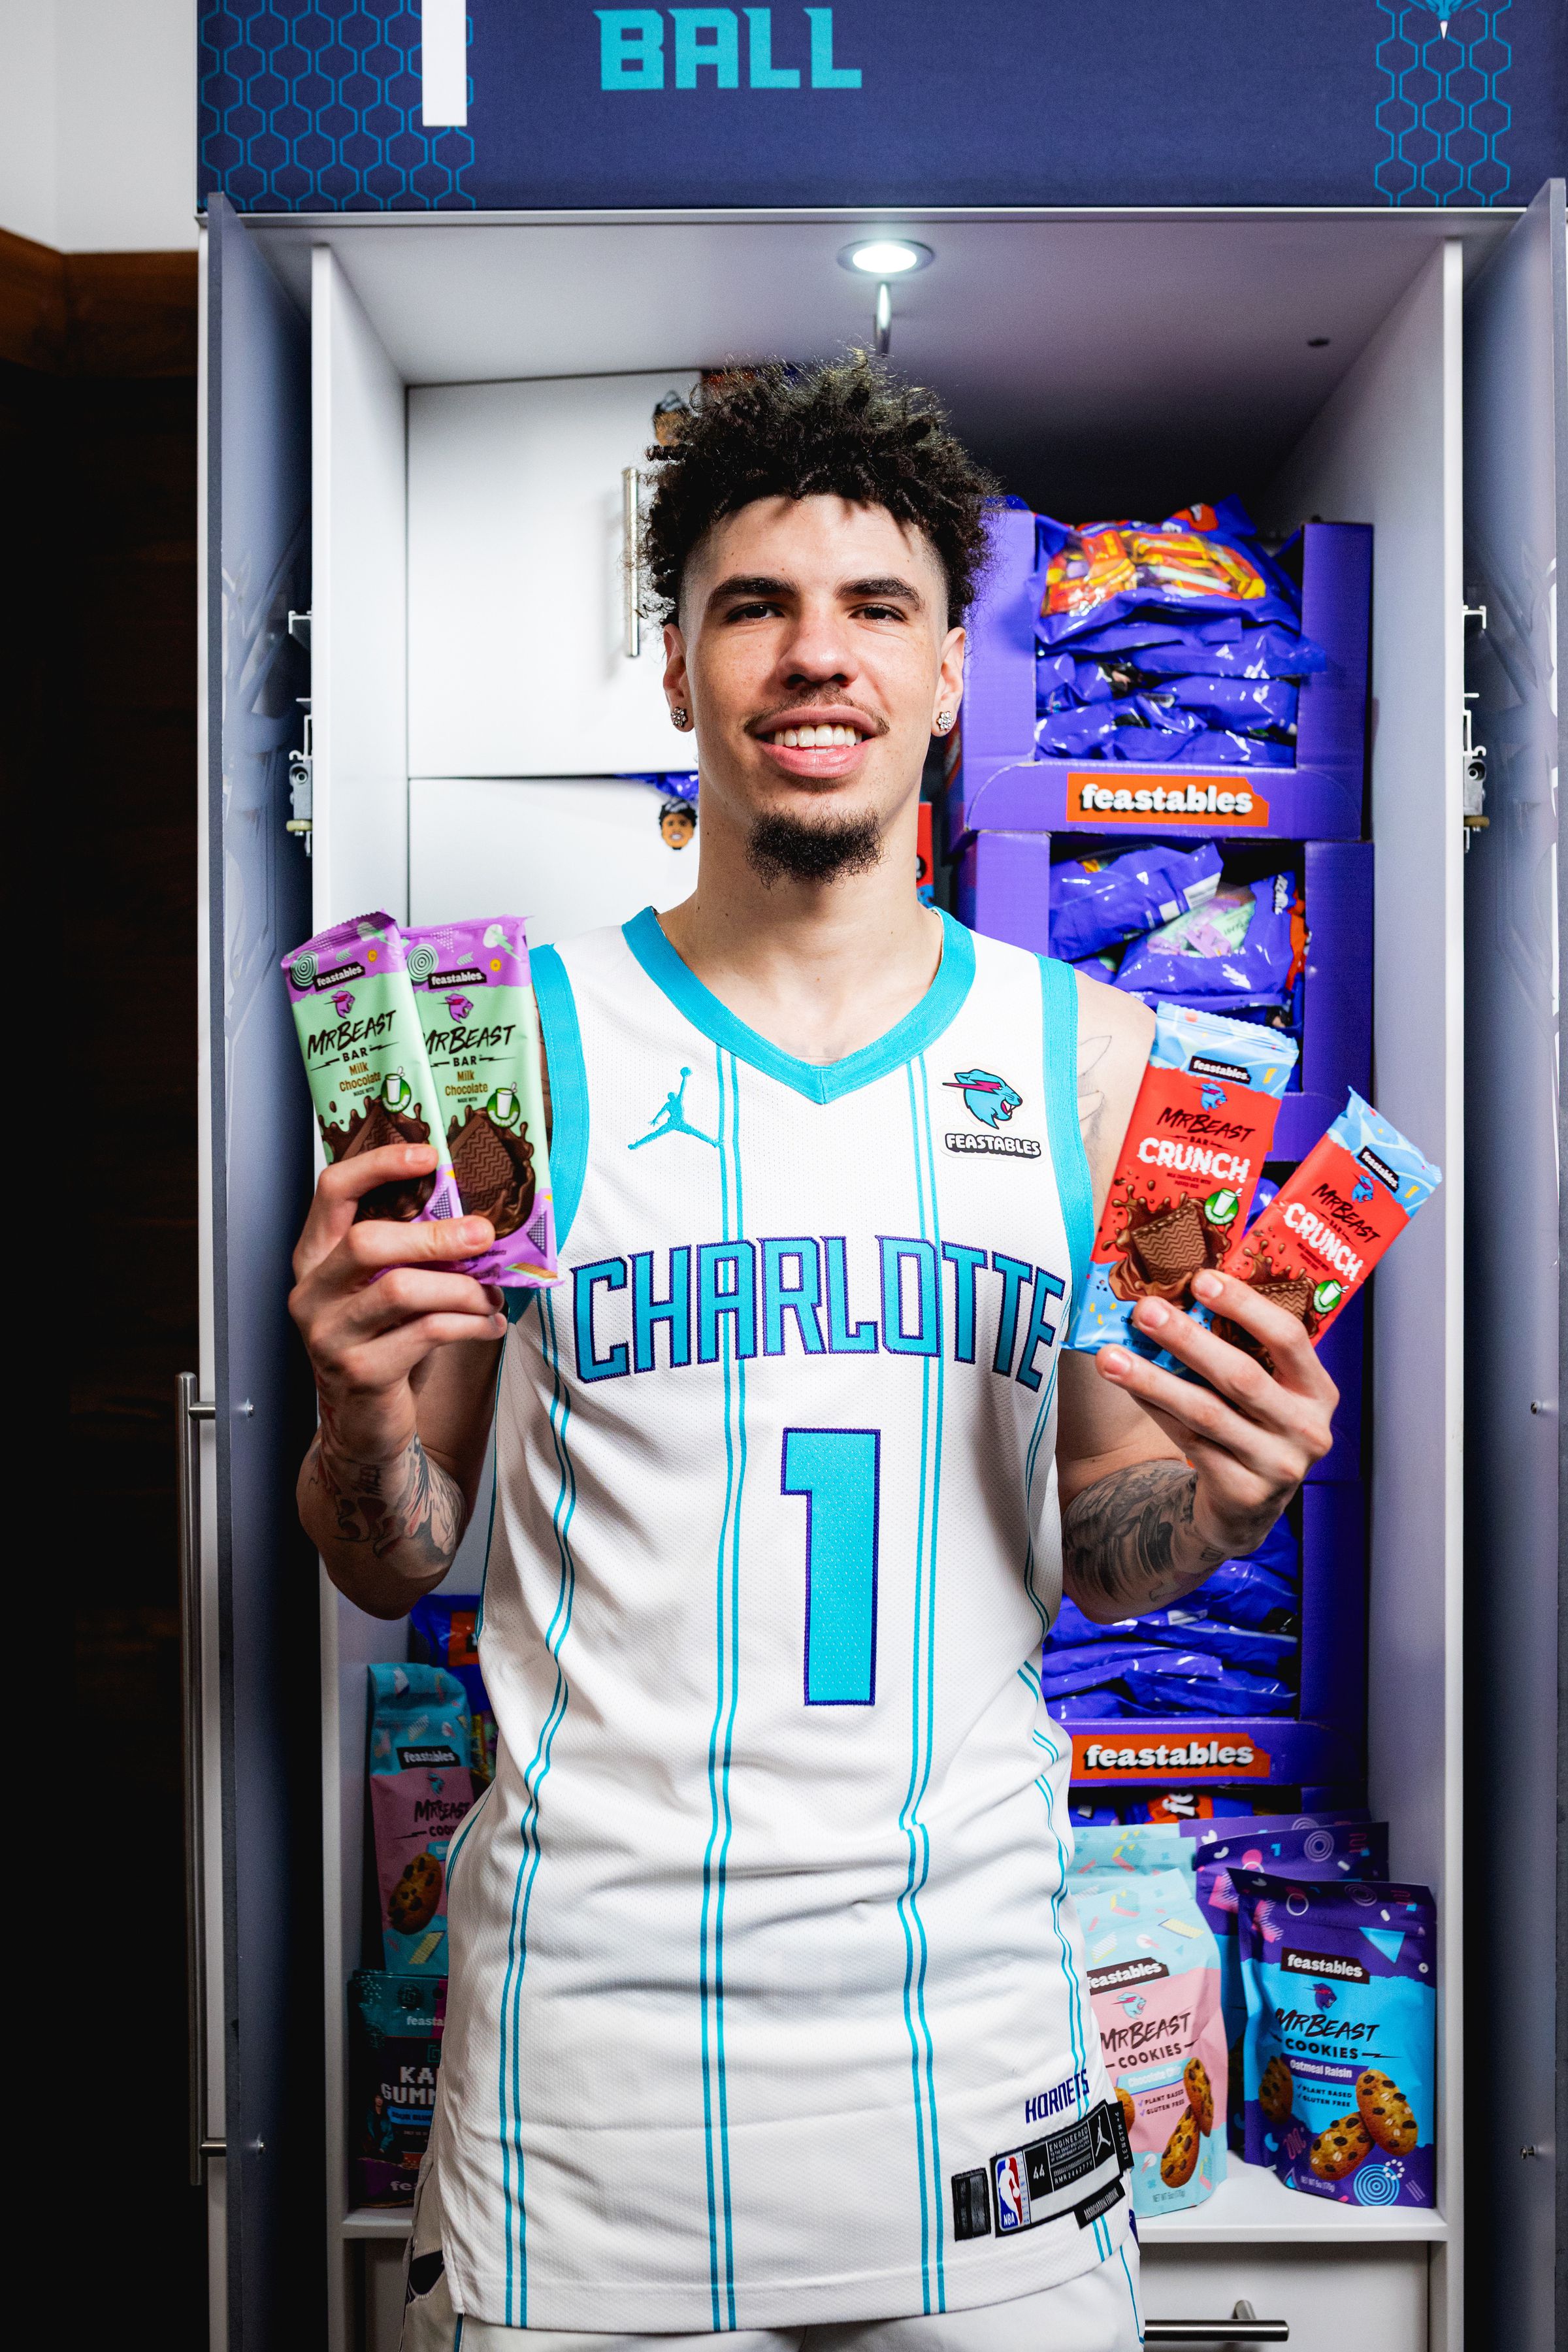 Here’s Charlotte Hornets player LaMelo Ball wearing the Feastables-branded jersey.